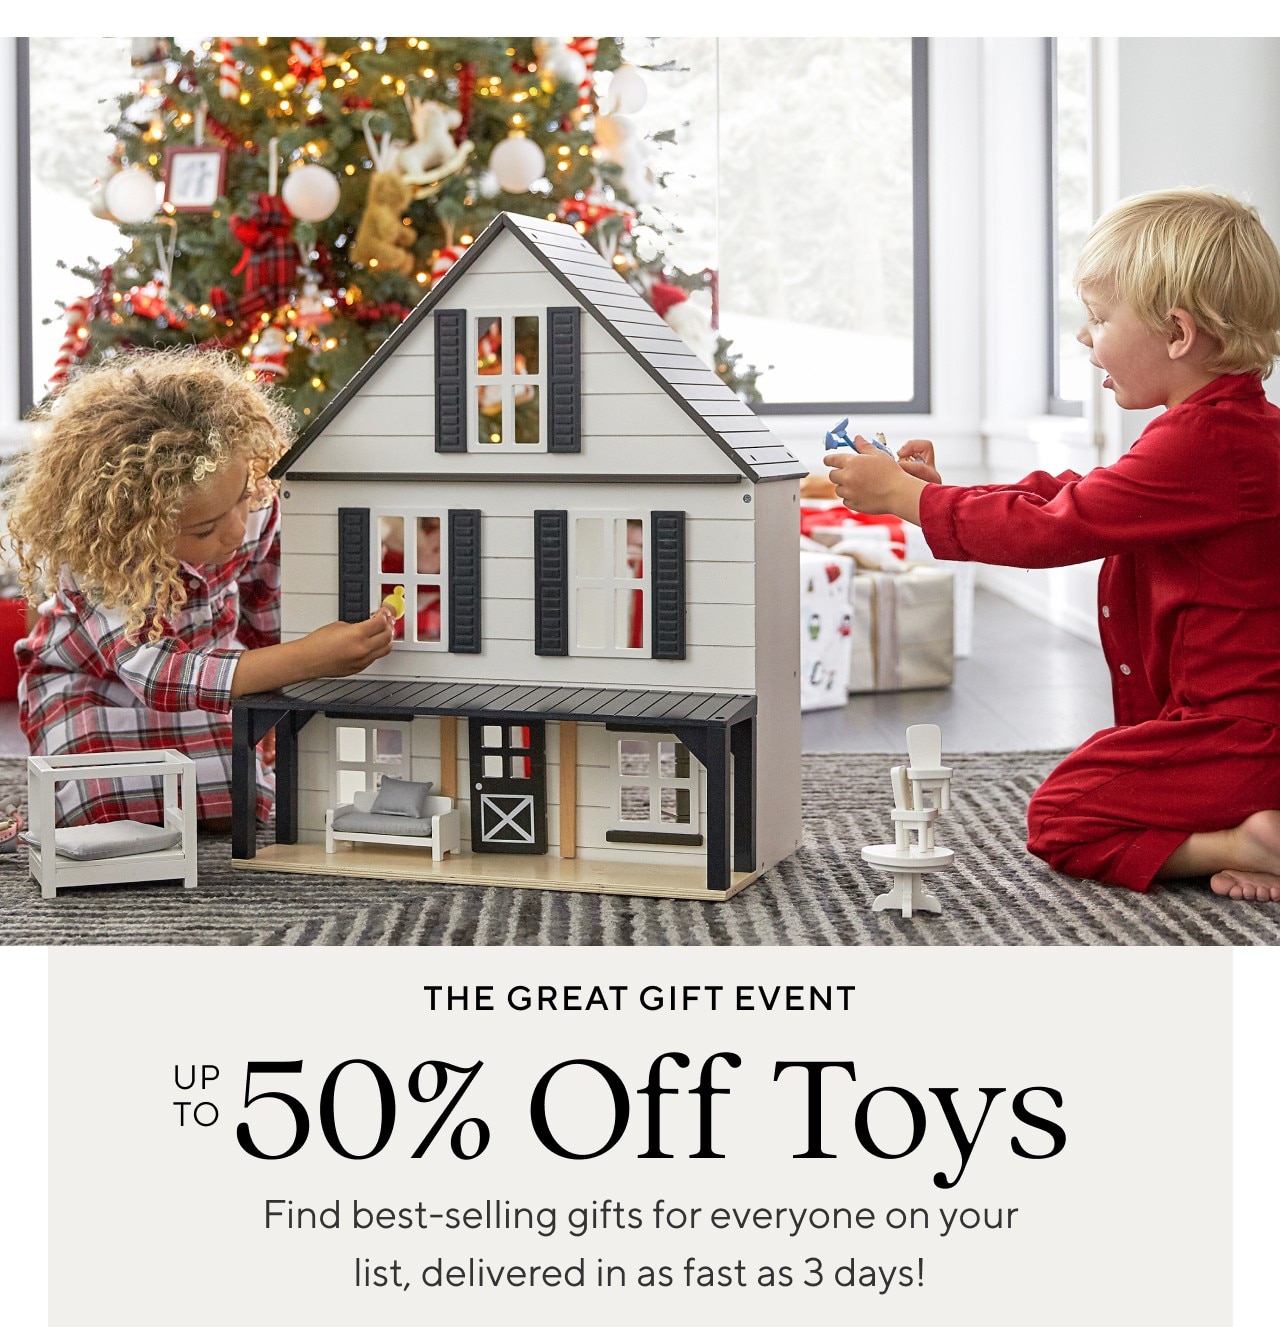 THE GREAT GIFT EVENT - UP TO 50% OFF TOYS